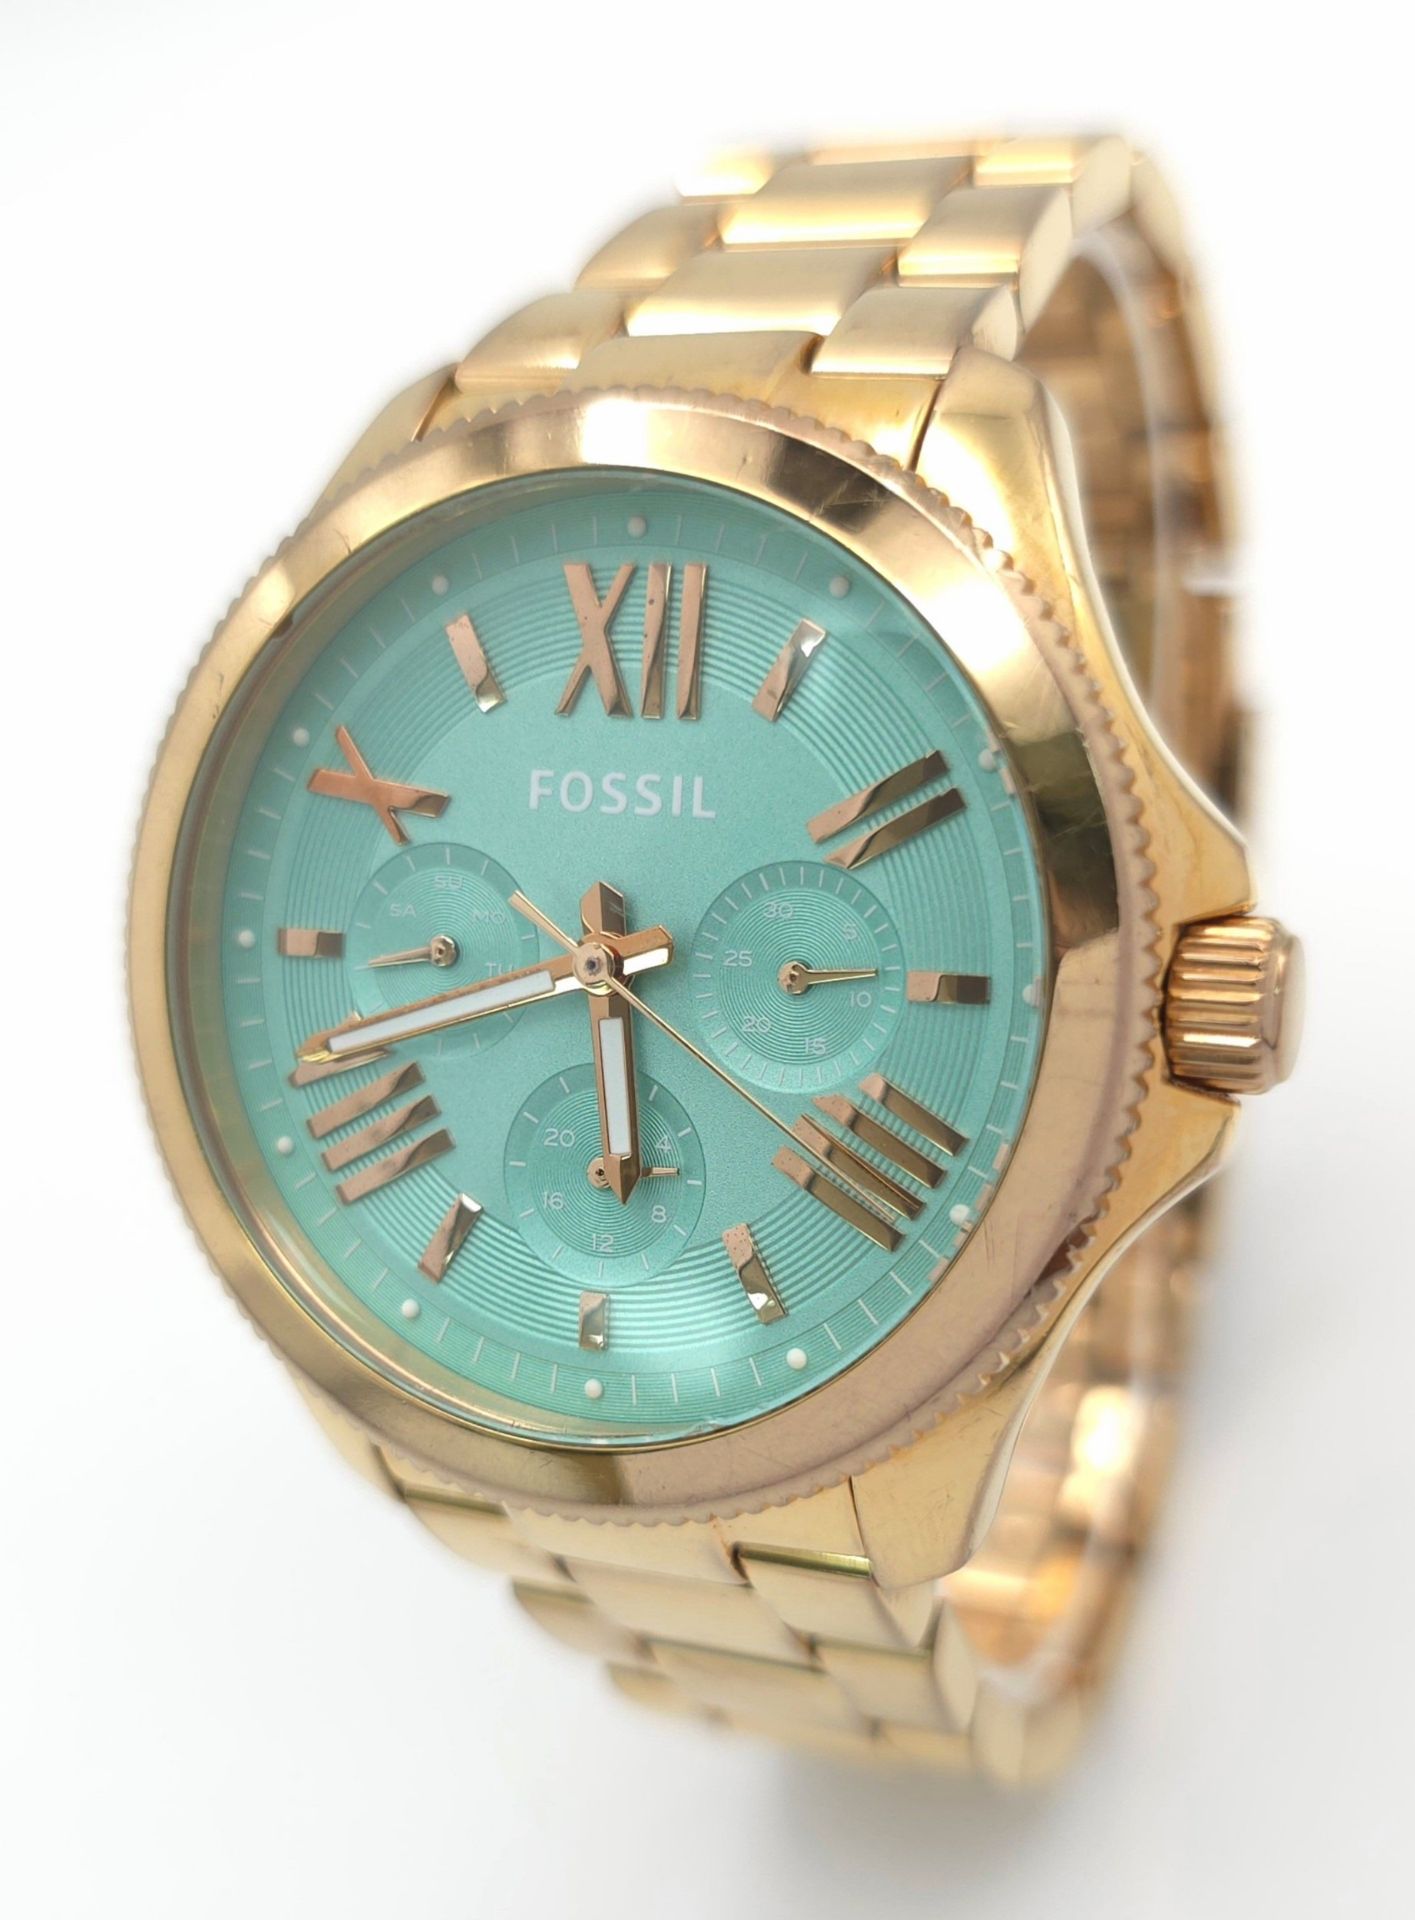 A Men’s Gold-Toned Green Face Watch Quartz Sports Watch by Fossil (44mm Case). Full Working Order.